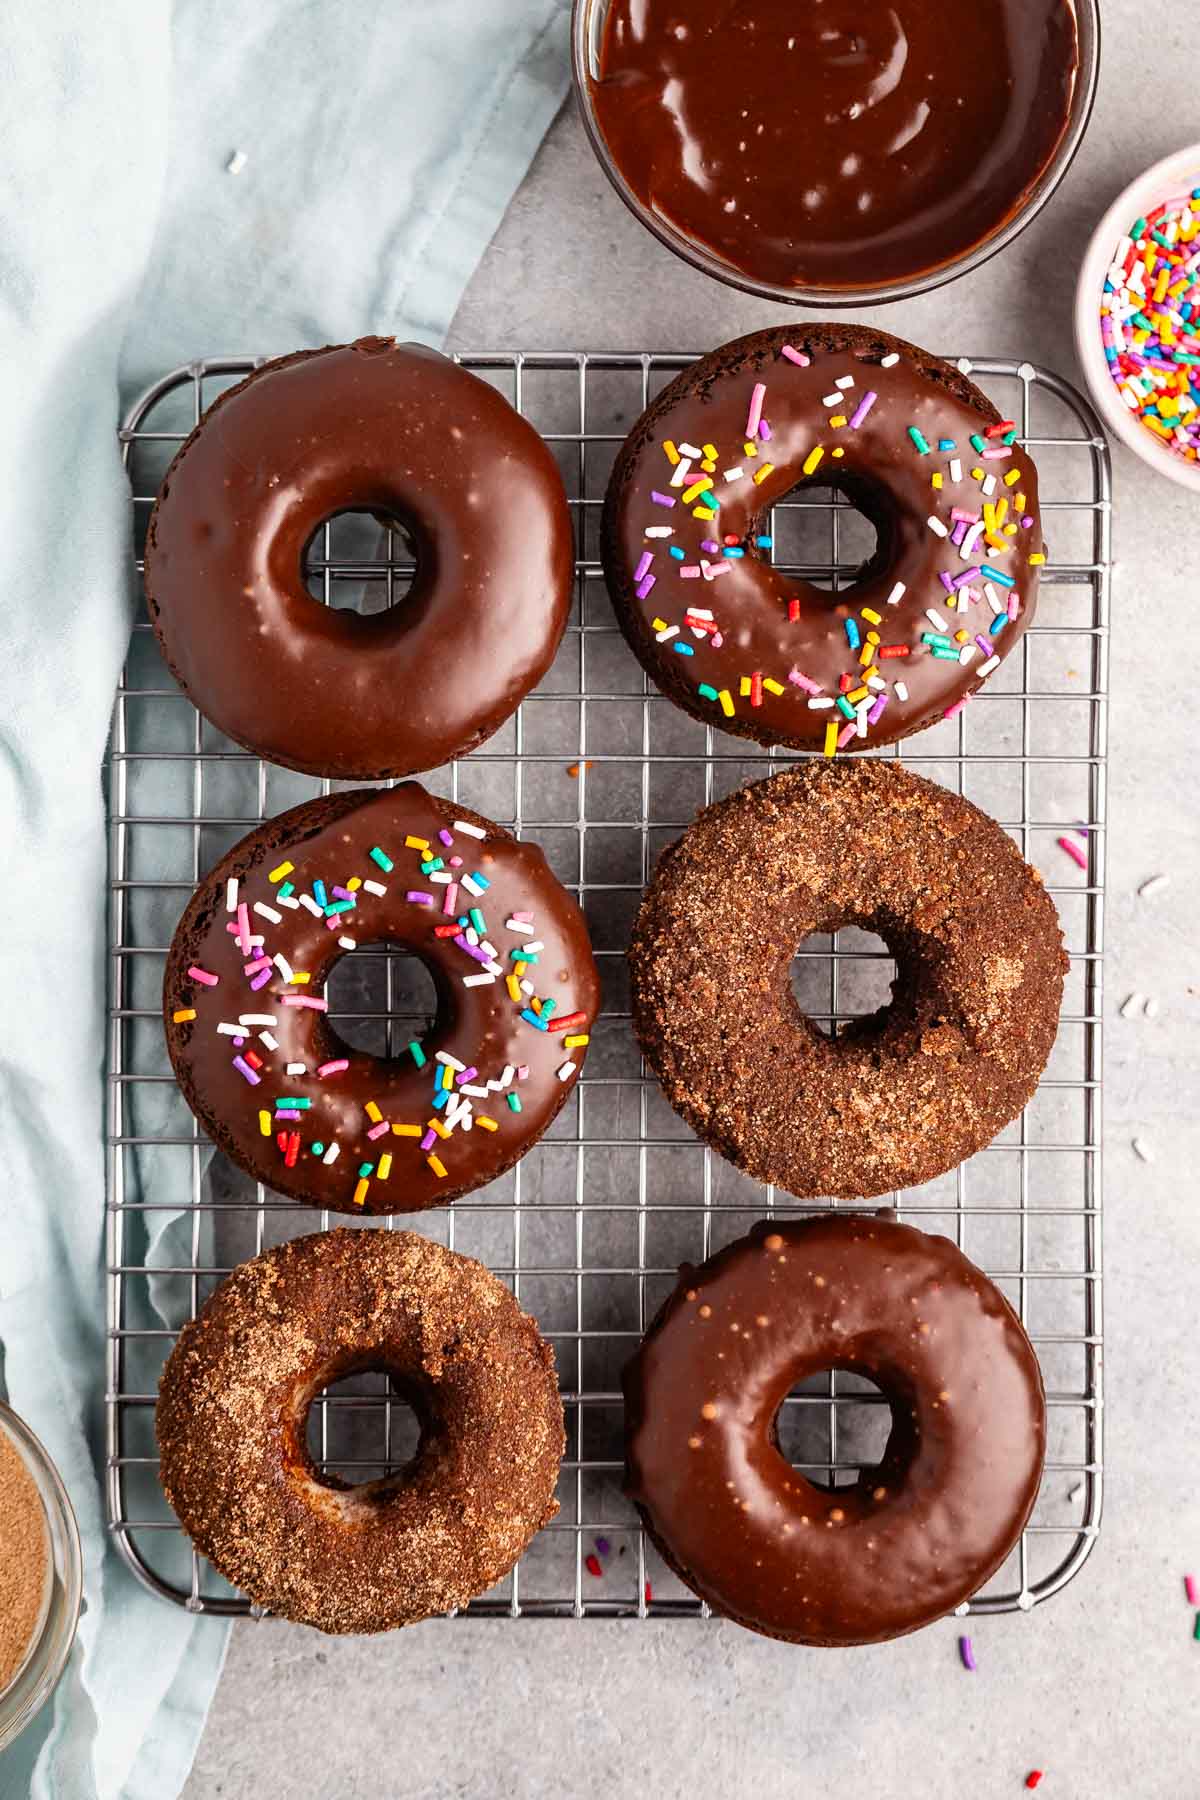 stacked chocolate donuts with chocolate glaze and colorful sprinkles and sugar on top,